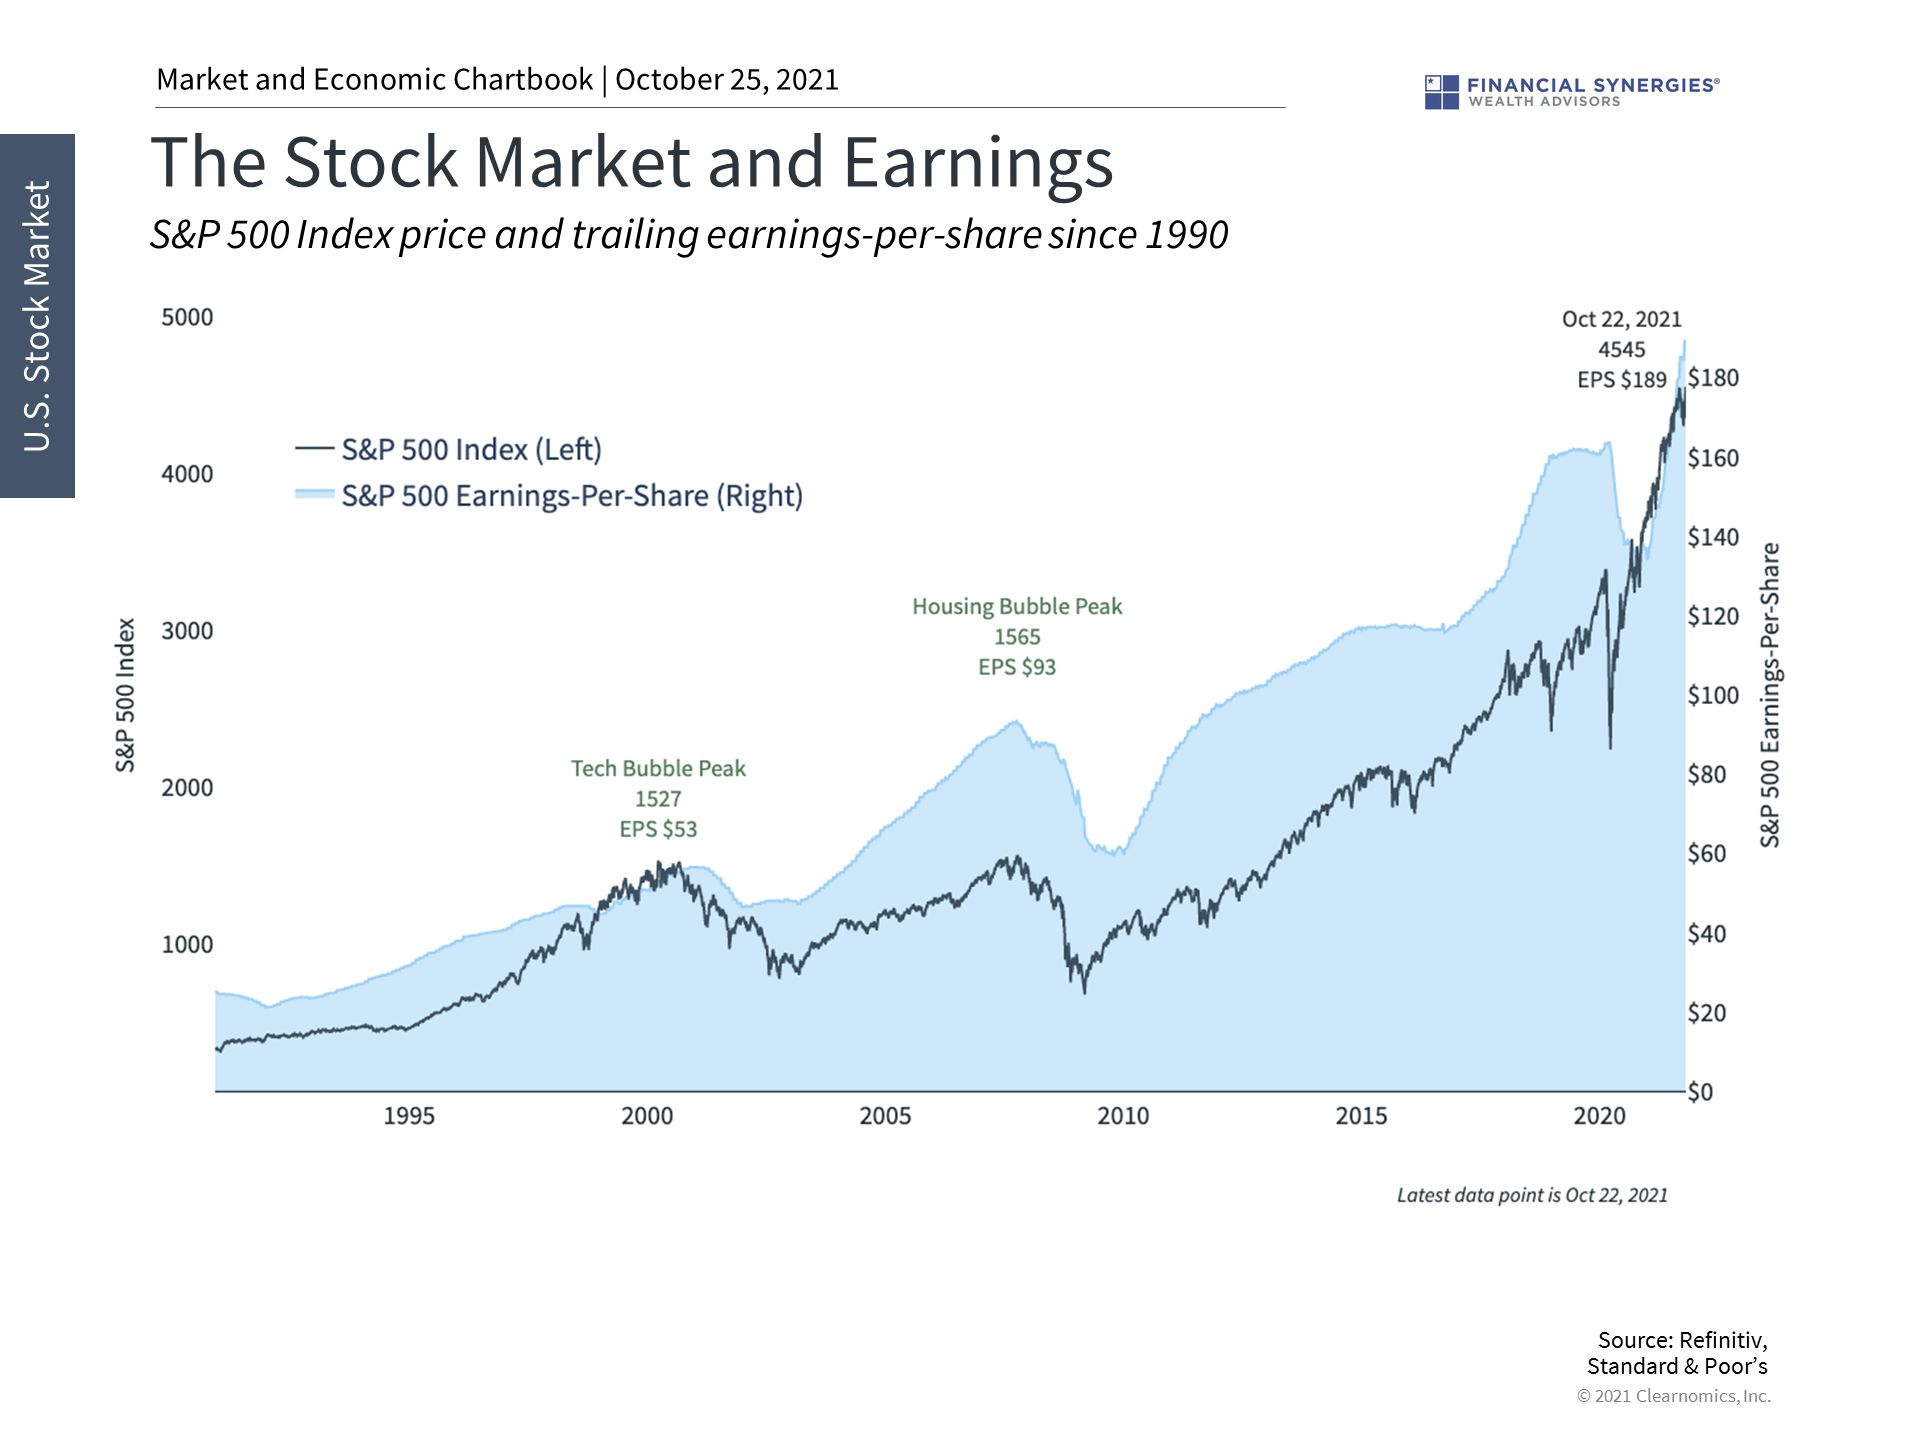 stocks and earnings